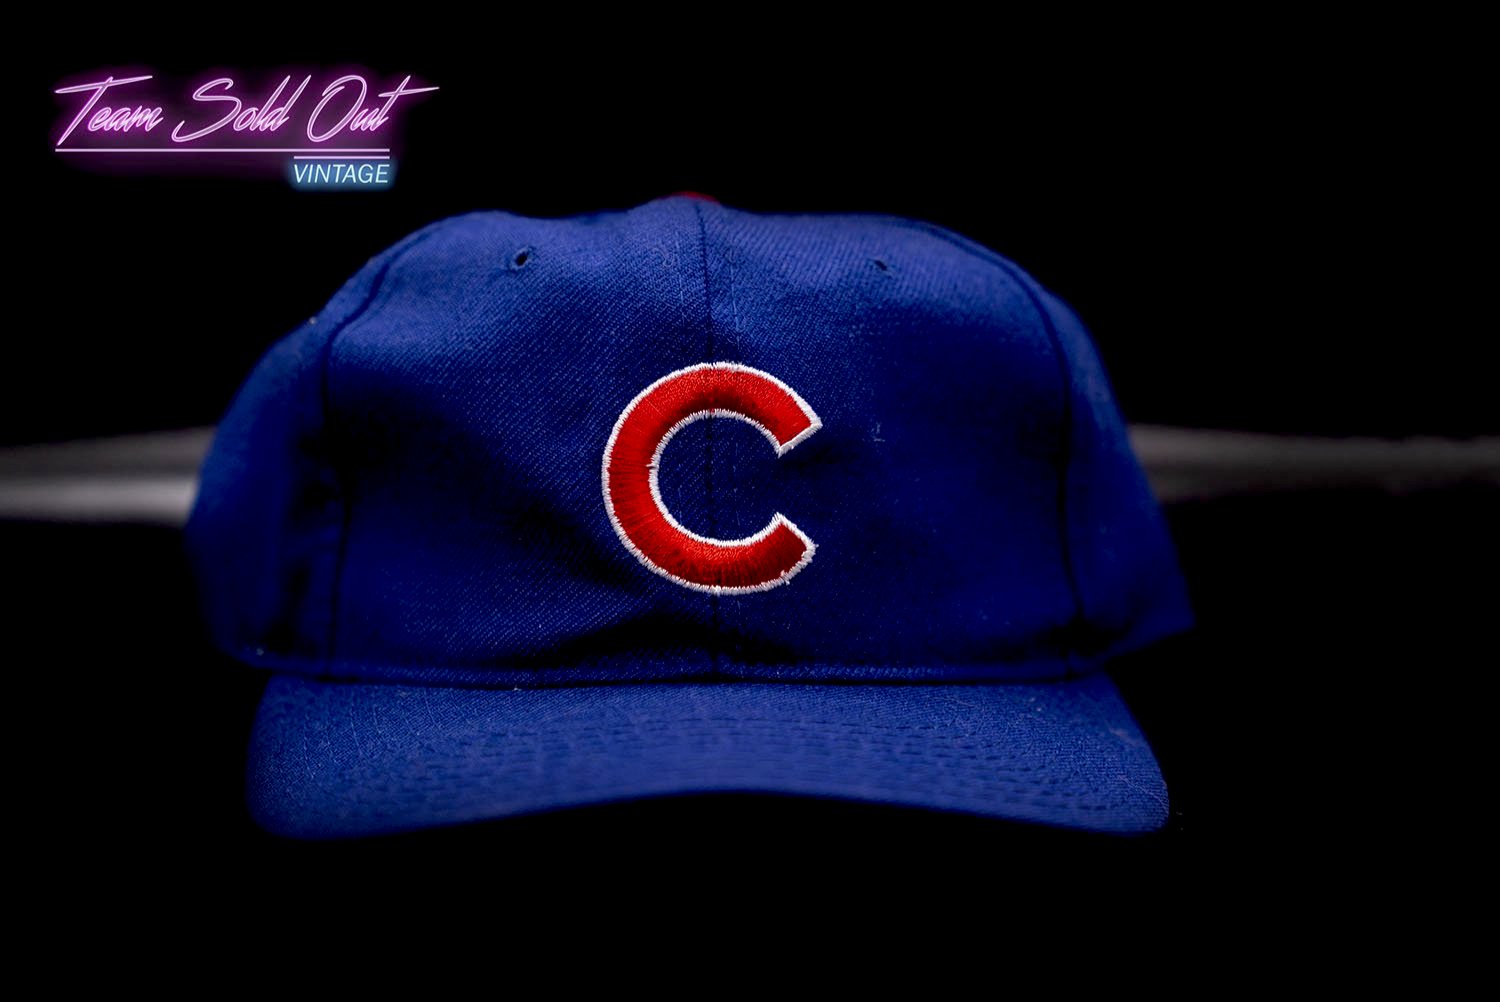 Chicago Cubs Hats in Chicago Cubs Team Shop 